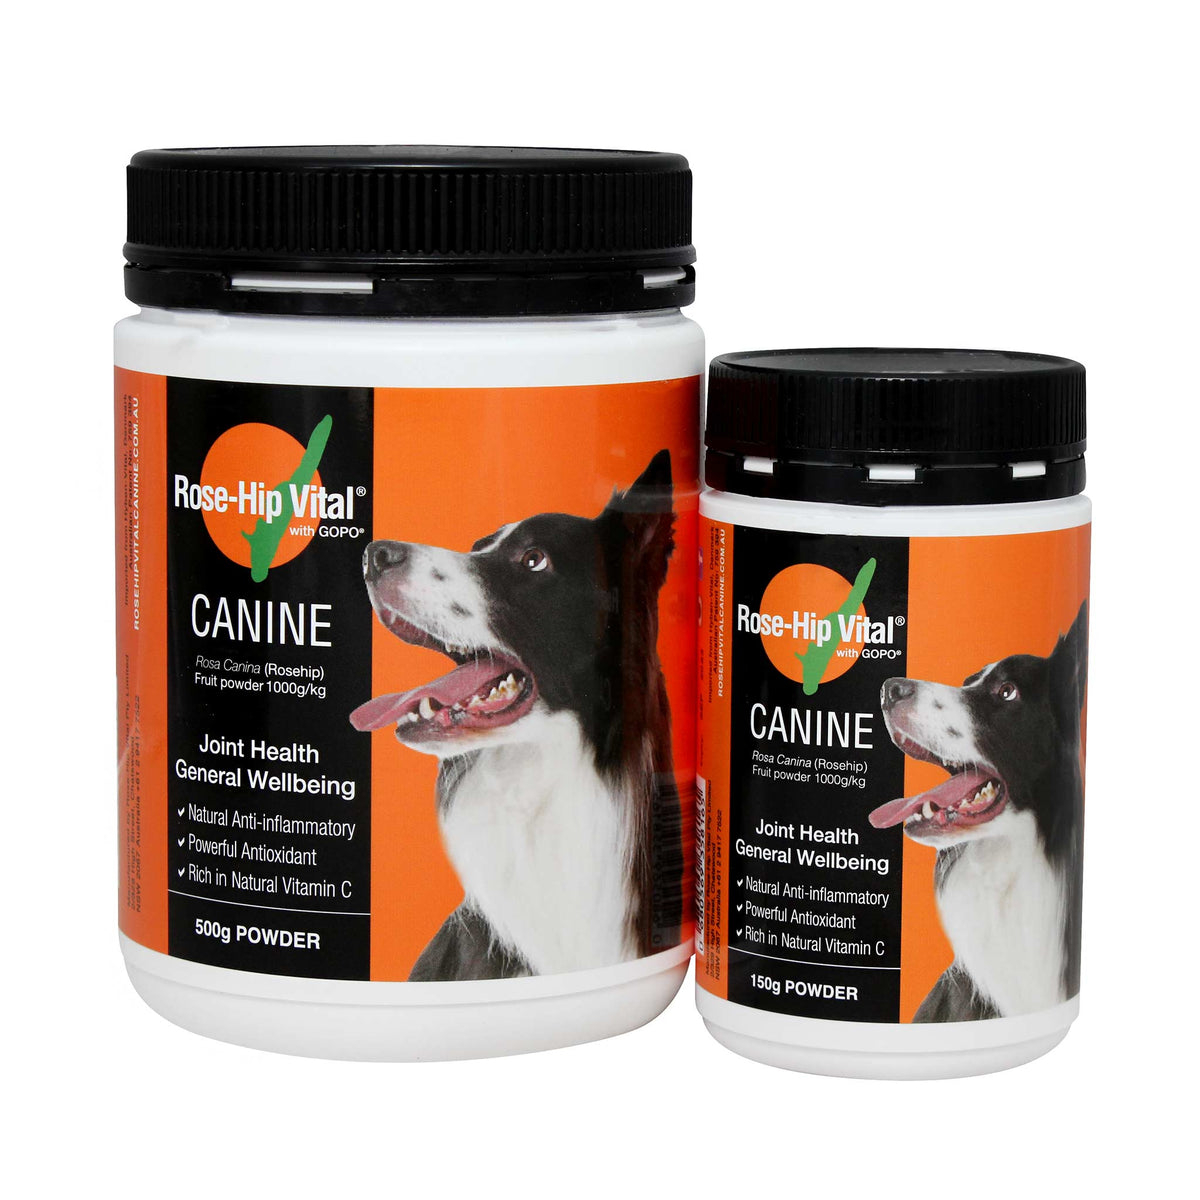 Rose-Hip Vital Canine - Joint Health &amp; General Wellbeing for Dogs